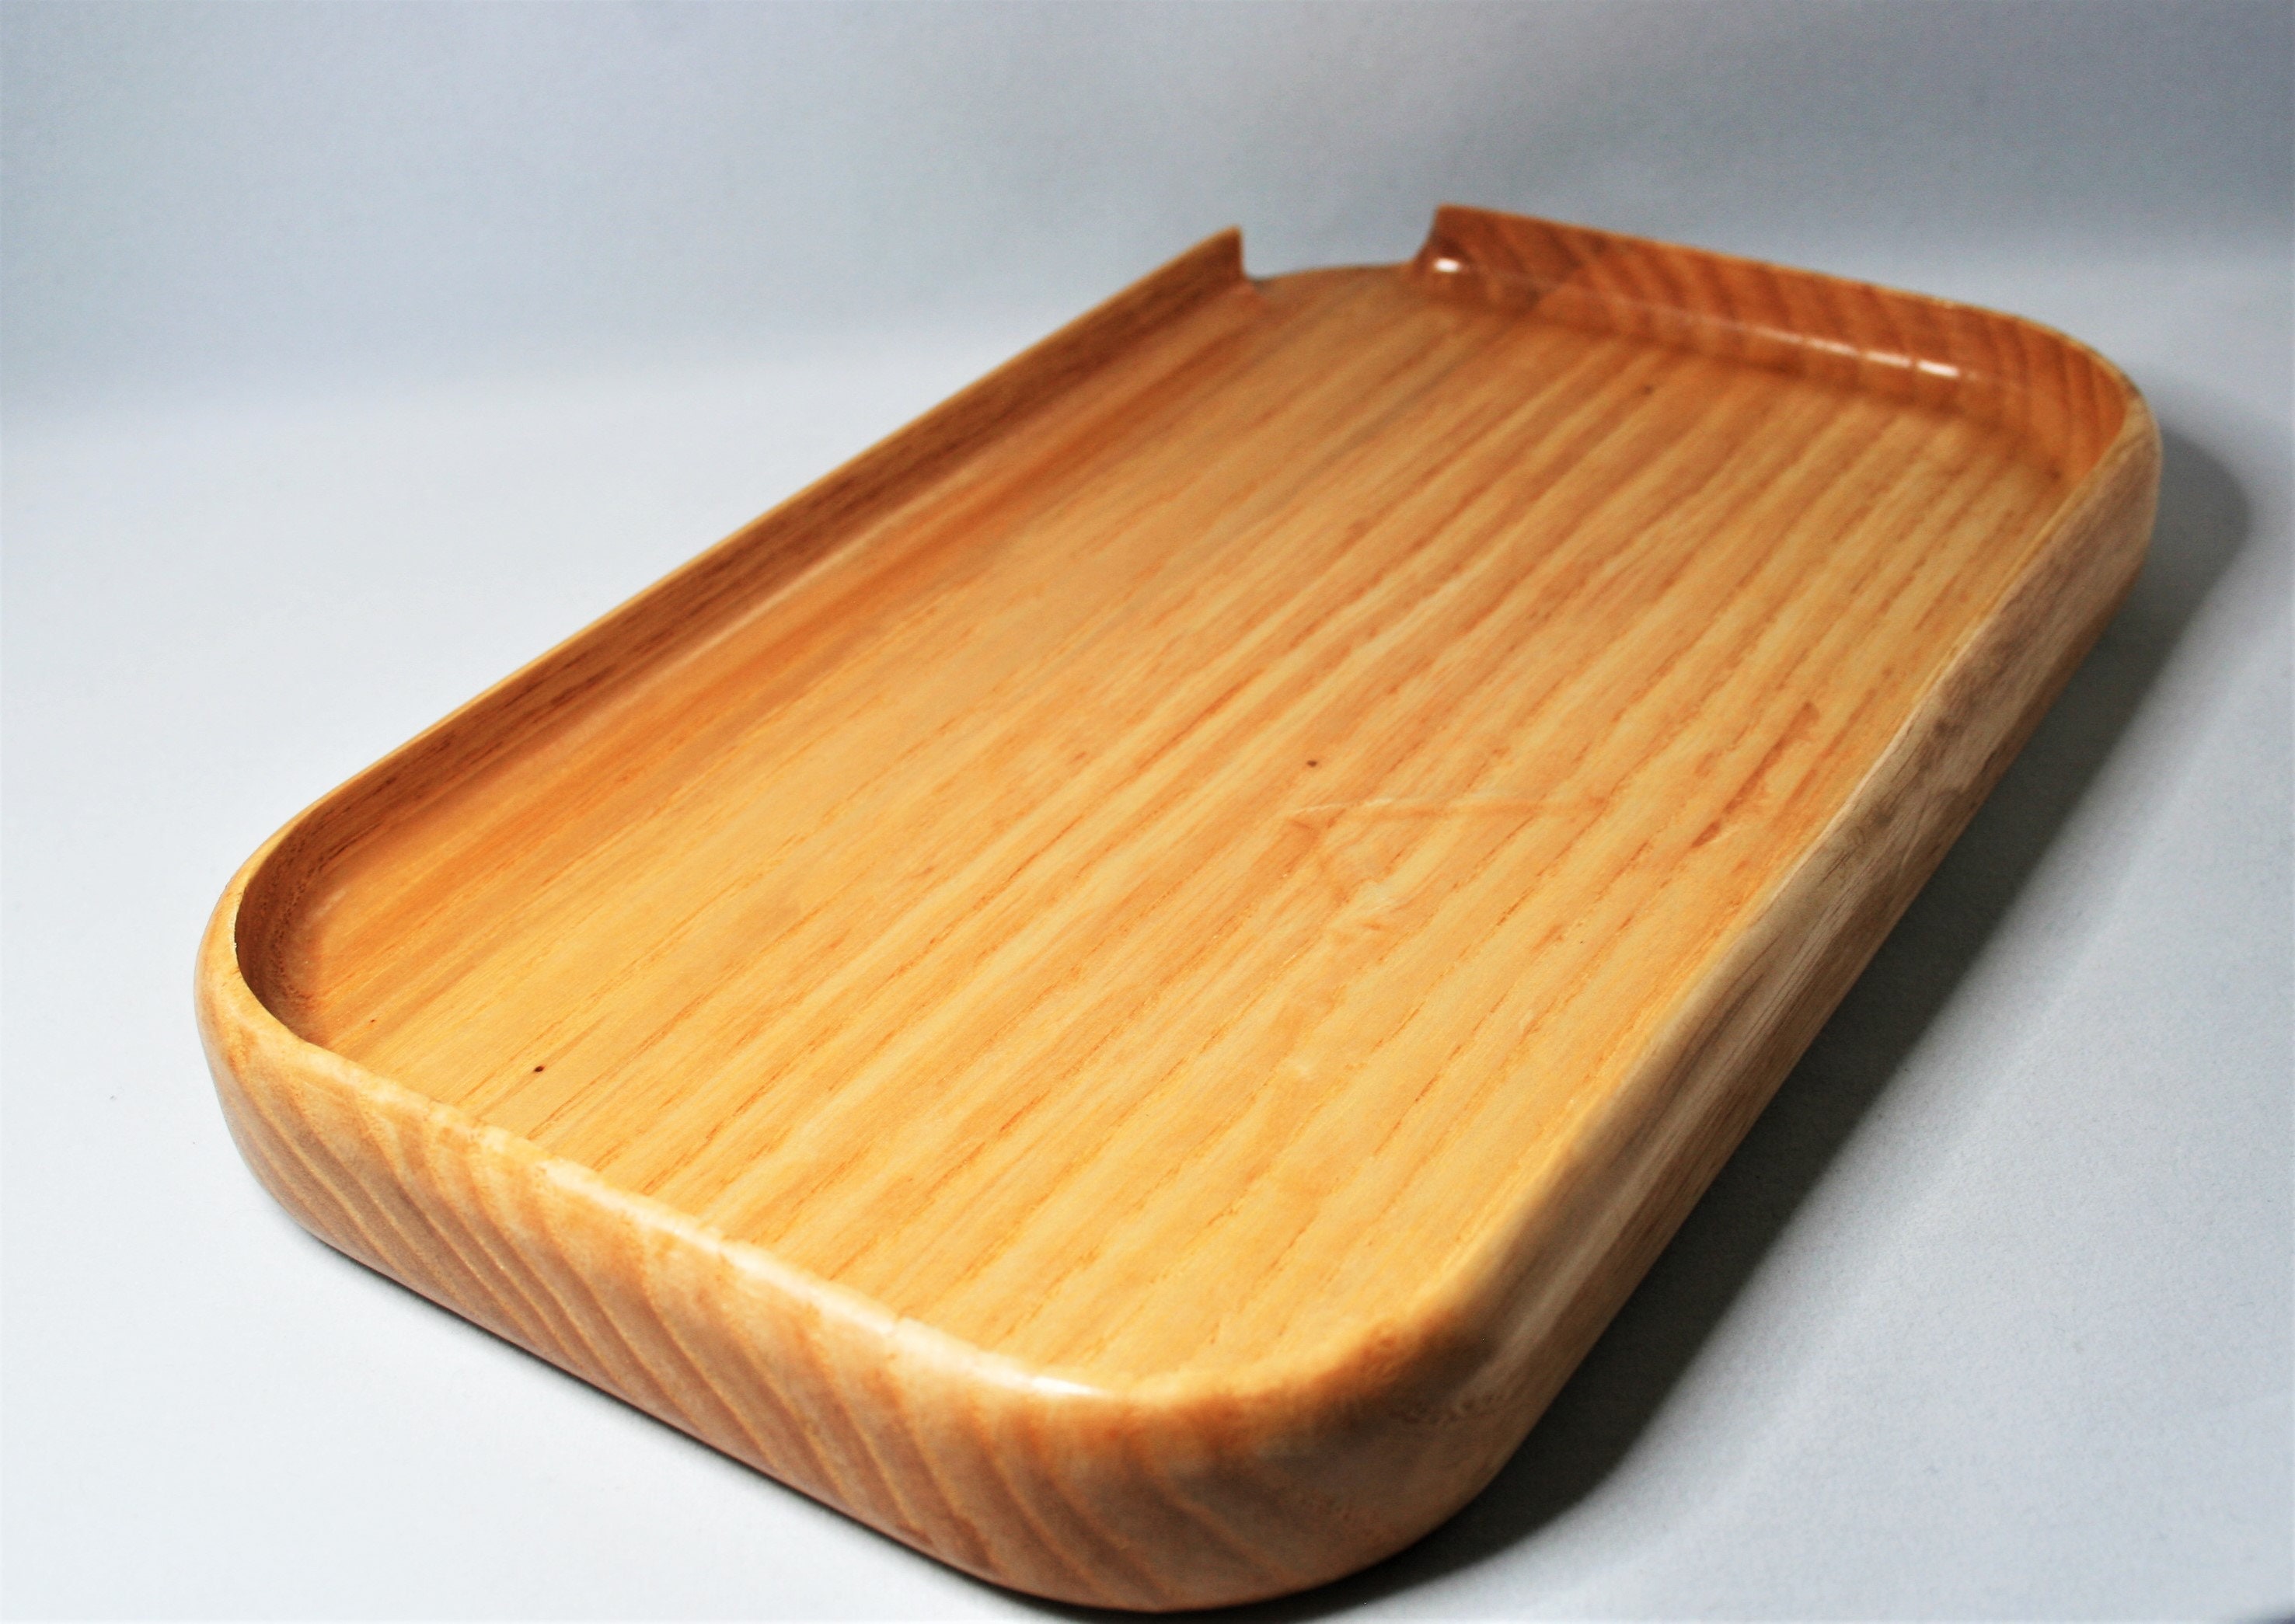 Rolling Tray Handmade Collection Budcessories Custom Wood Rolling / Valet  Trays Walnut, Cherry, Maple Wood 